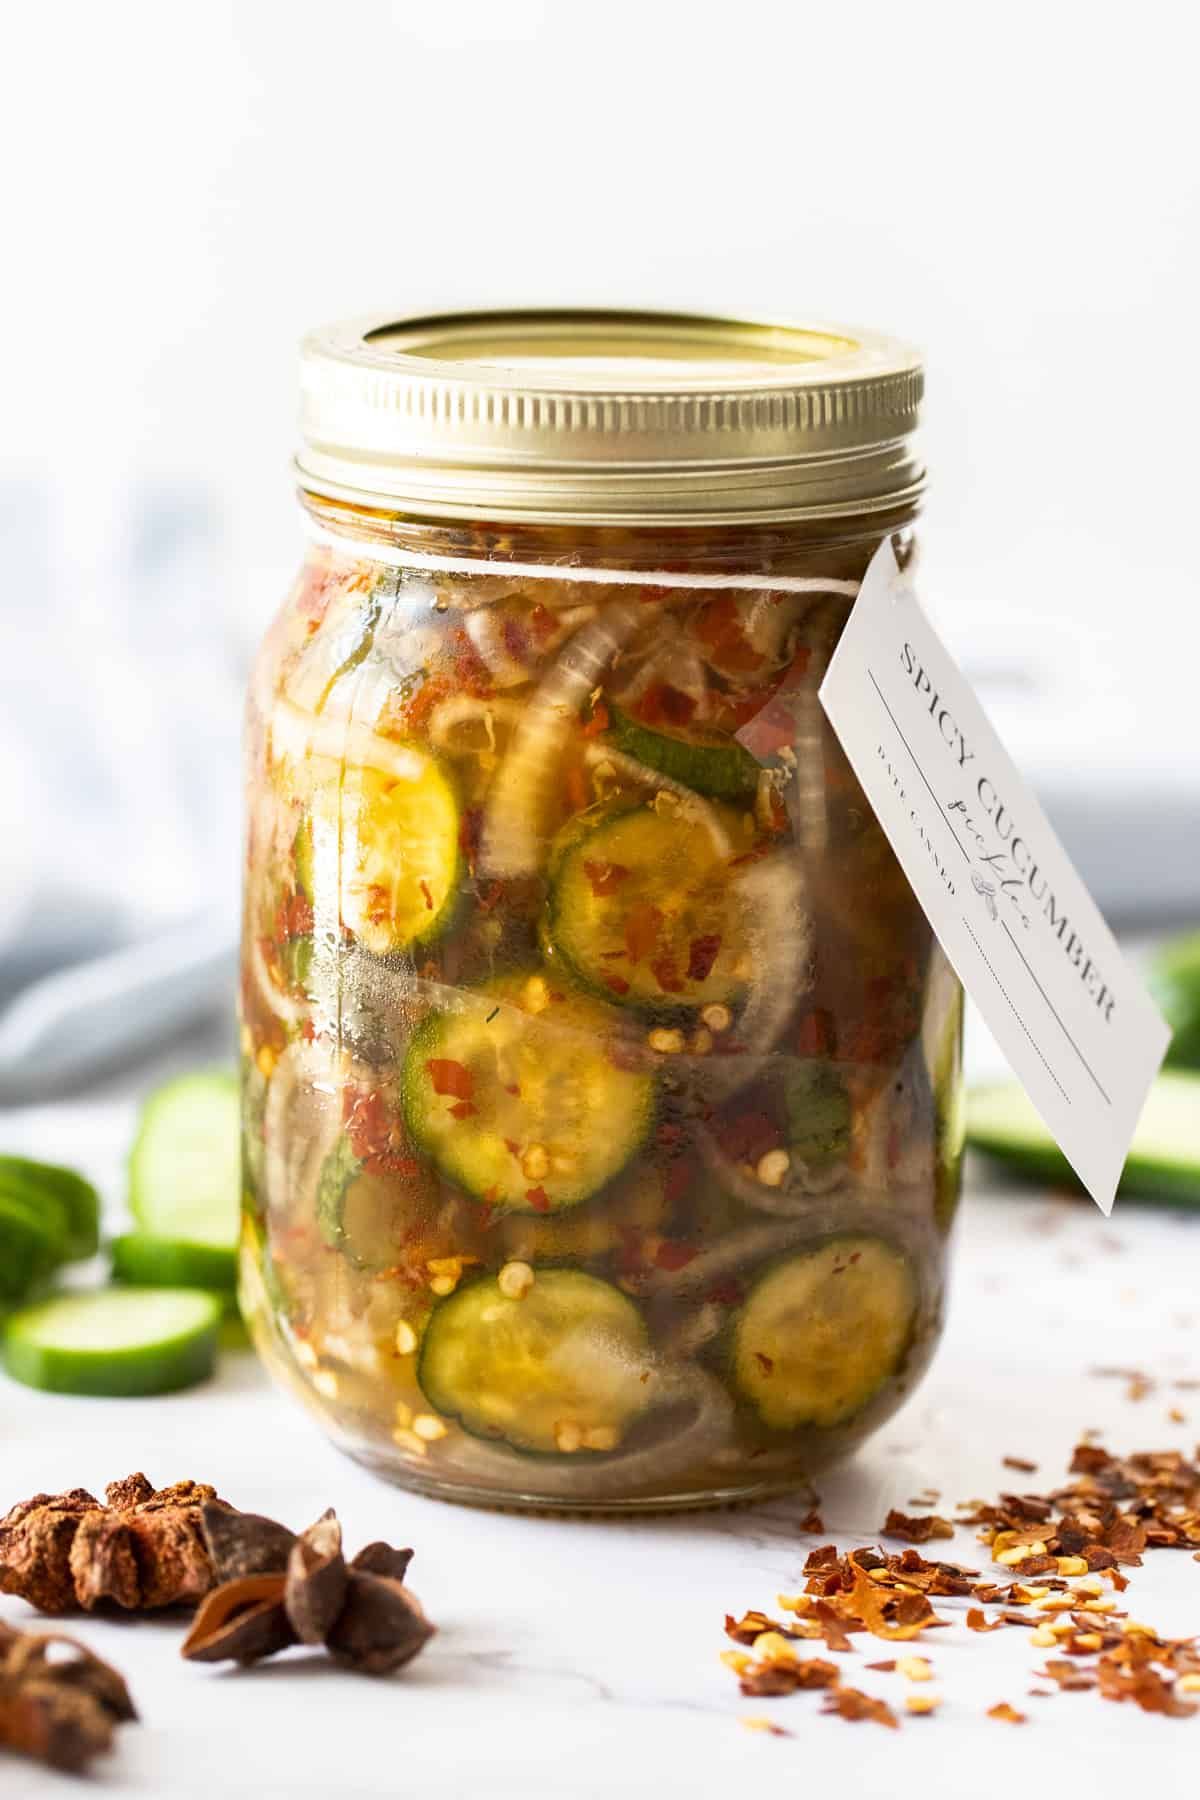 Spicy chili pickles in a glass jar.